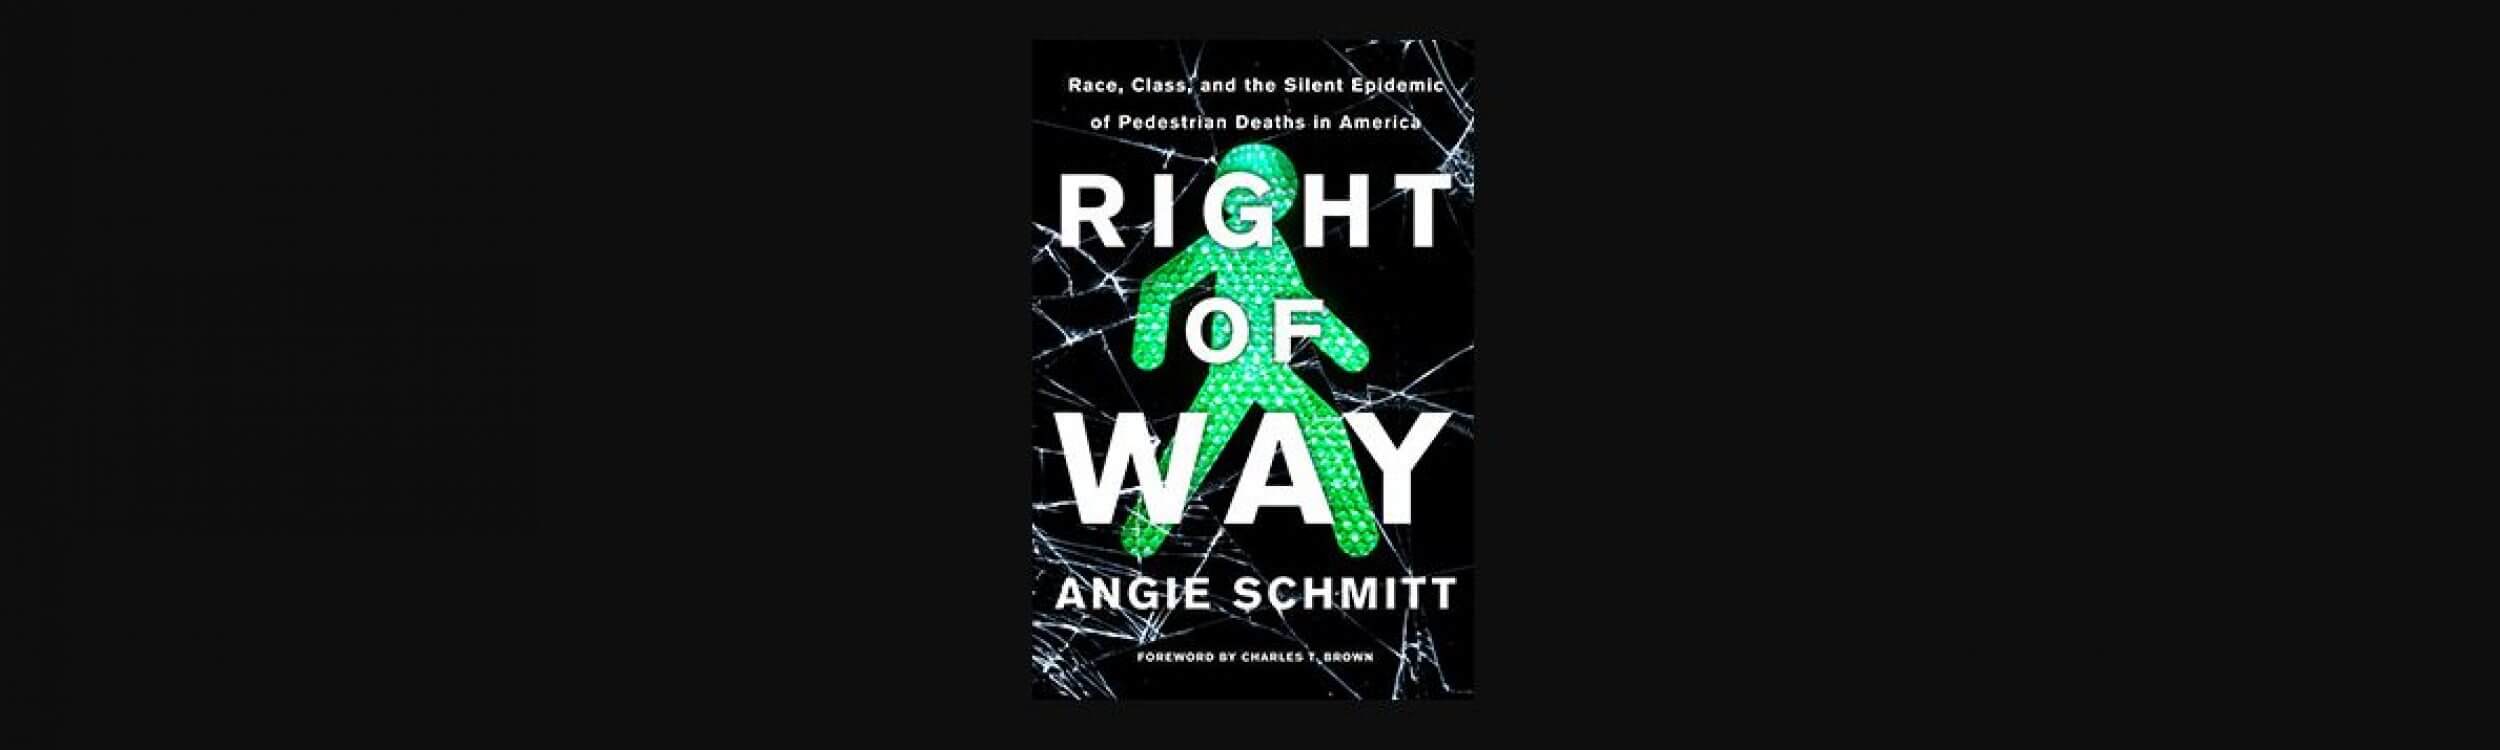 Our conversation with Angie Schmitt: watch the recording